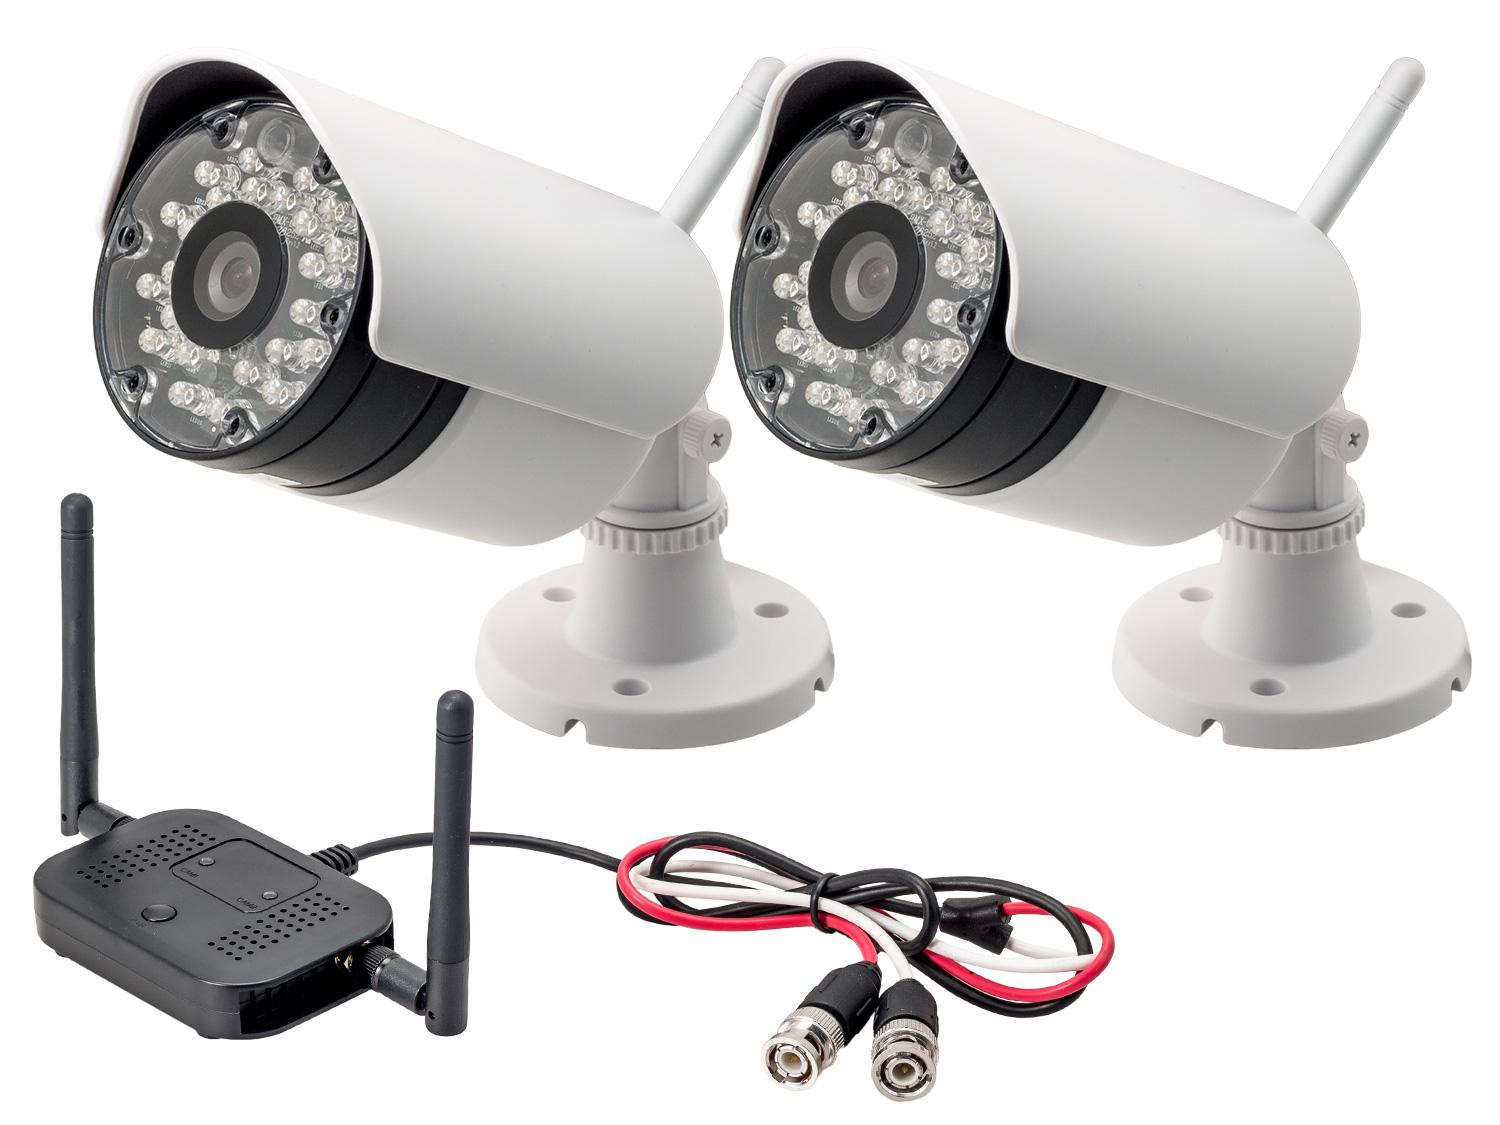 The Incredible Advantages of Digital CCTV